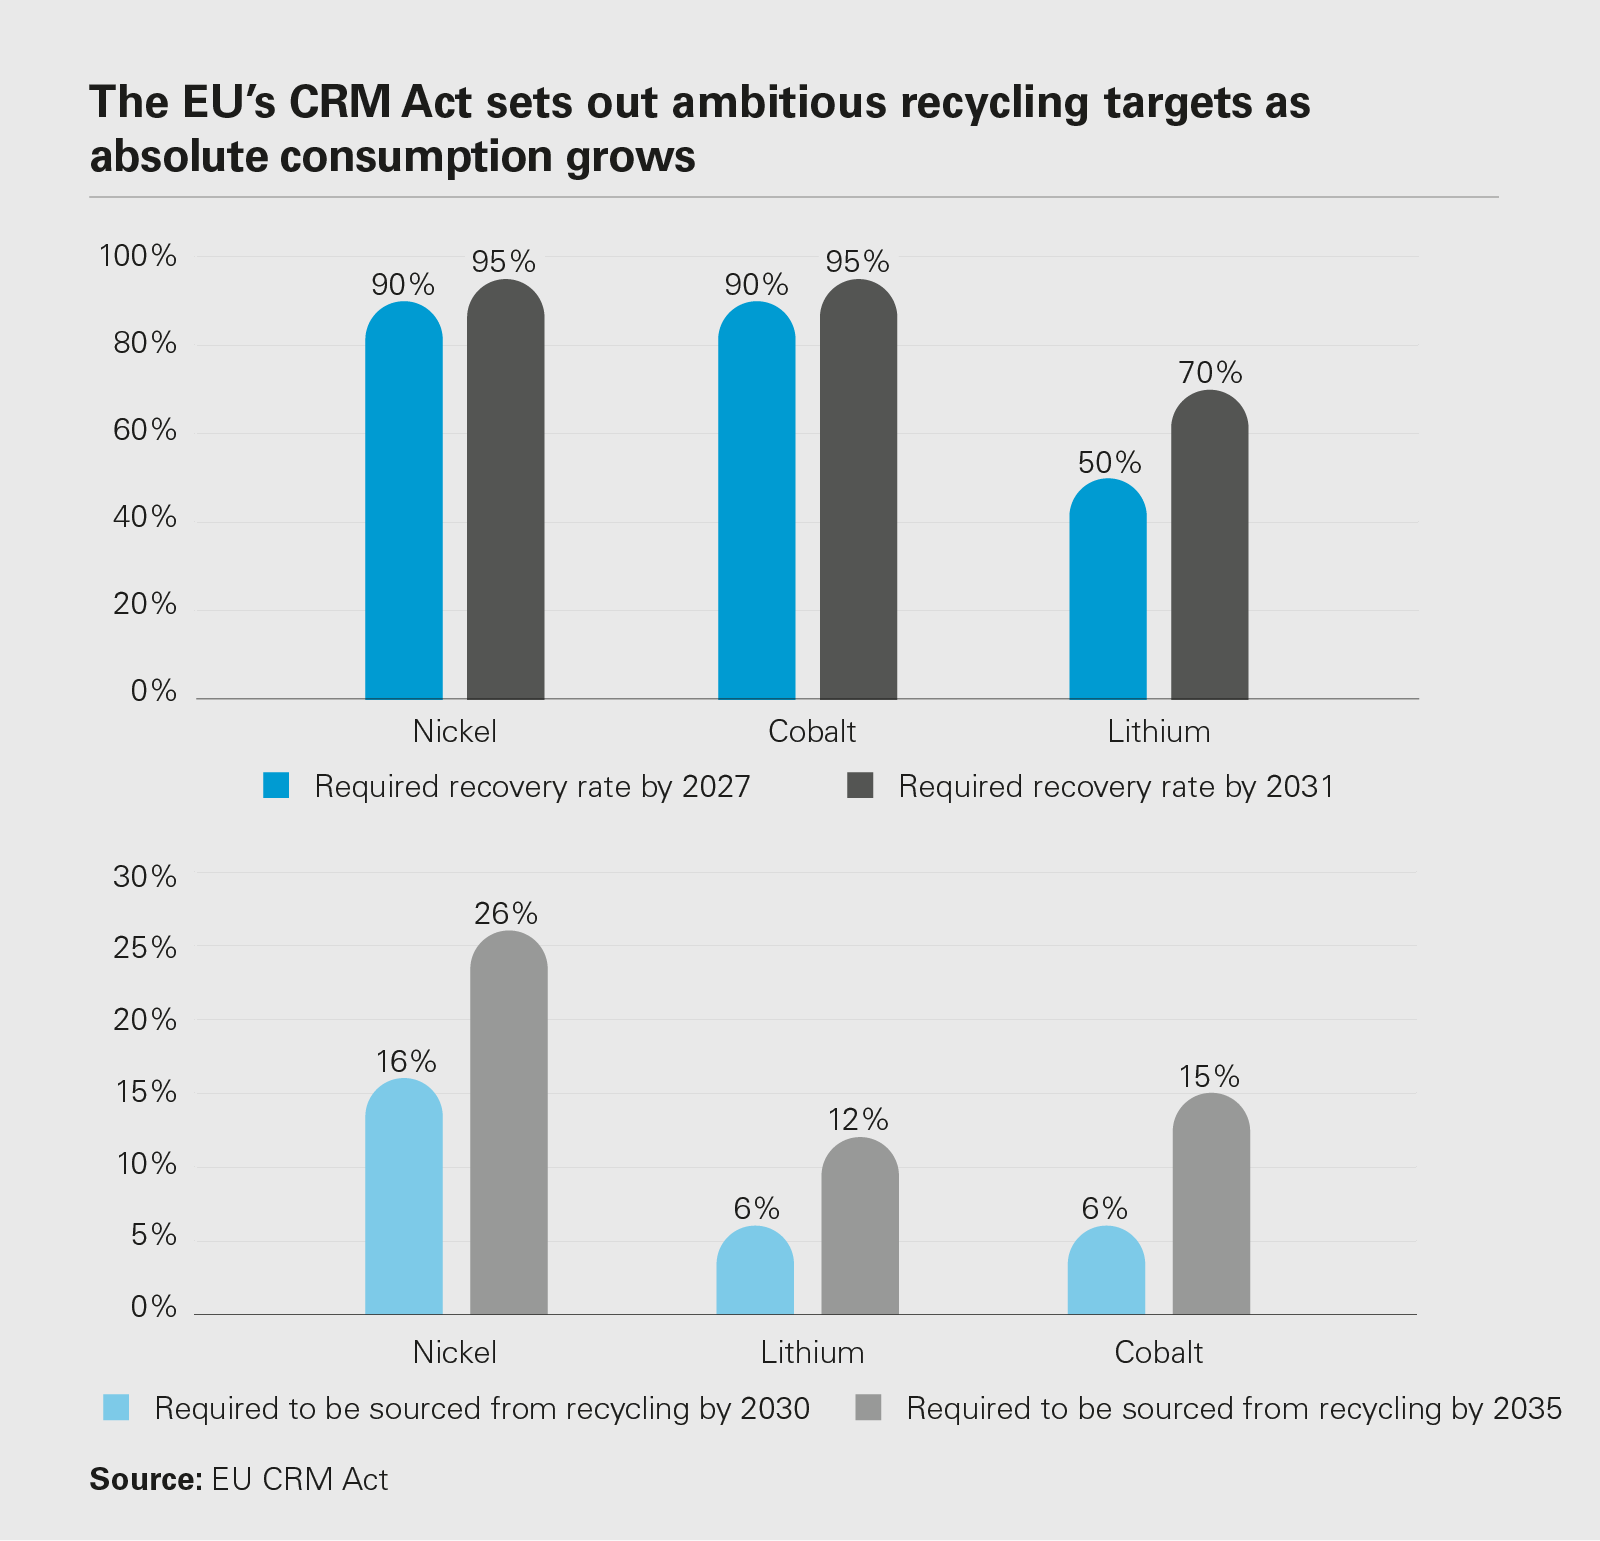 The EU’s CRM Act sets out ambitious recycling targets as absolute consumption grows